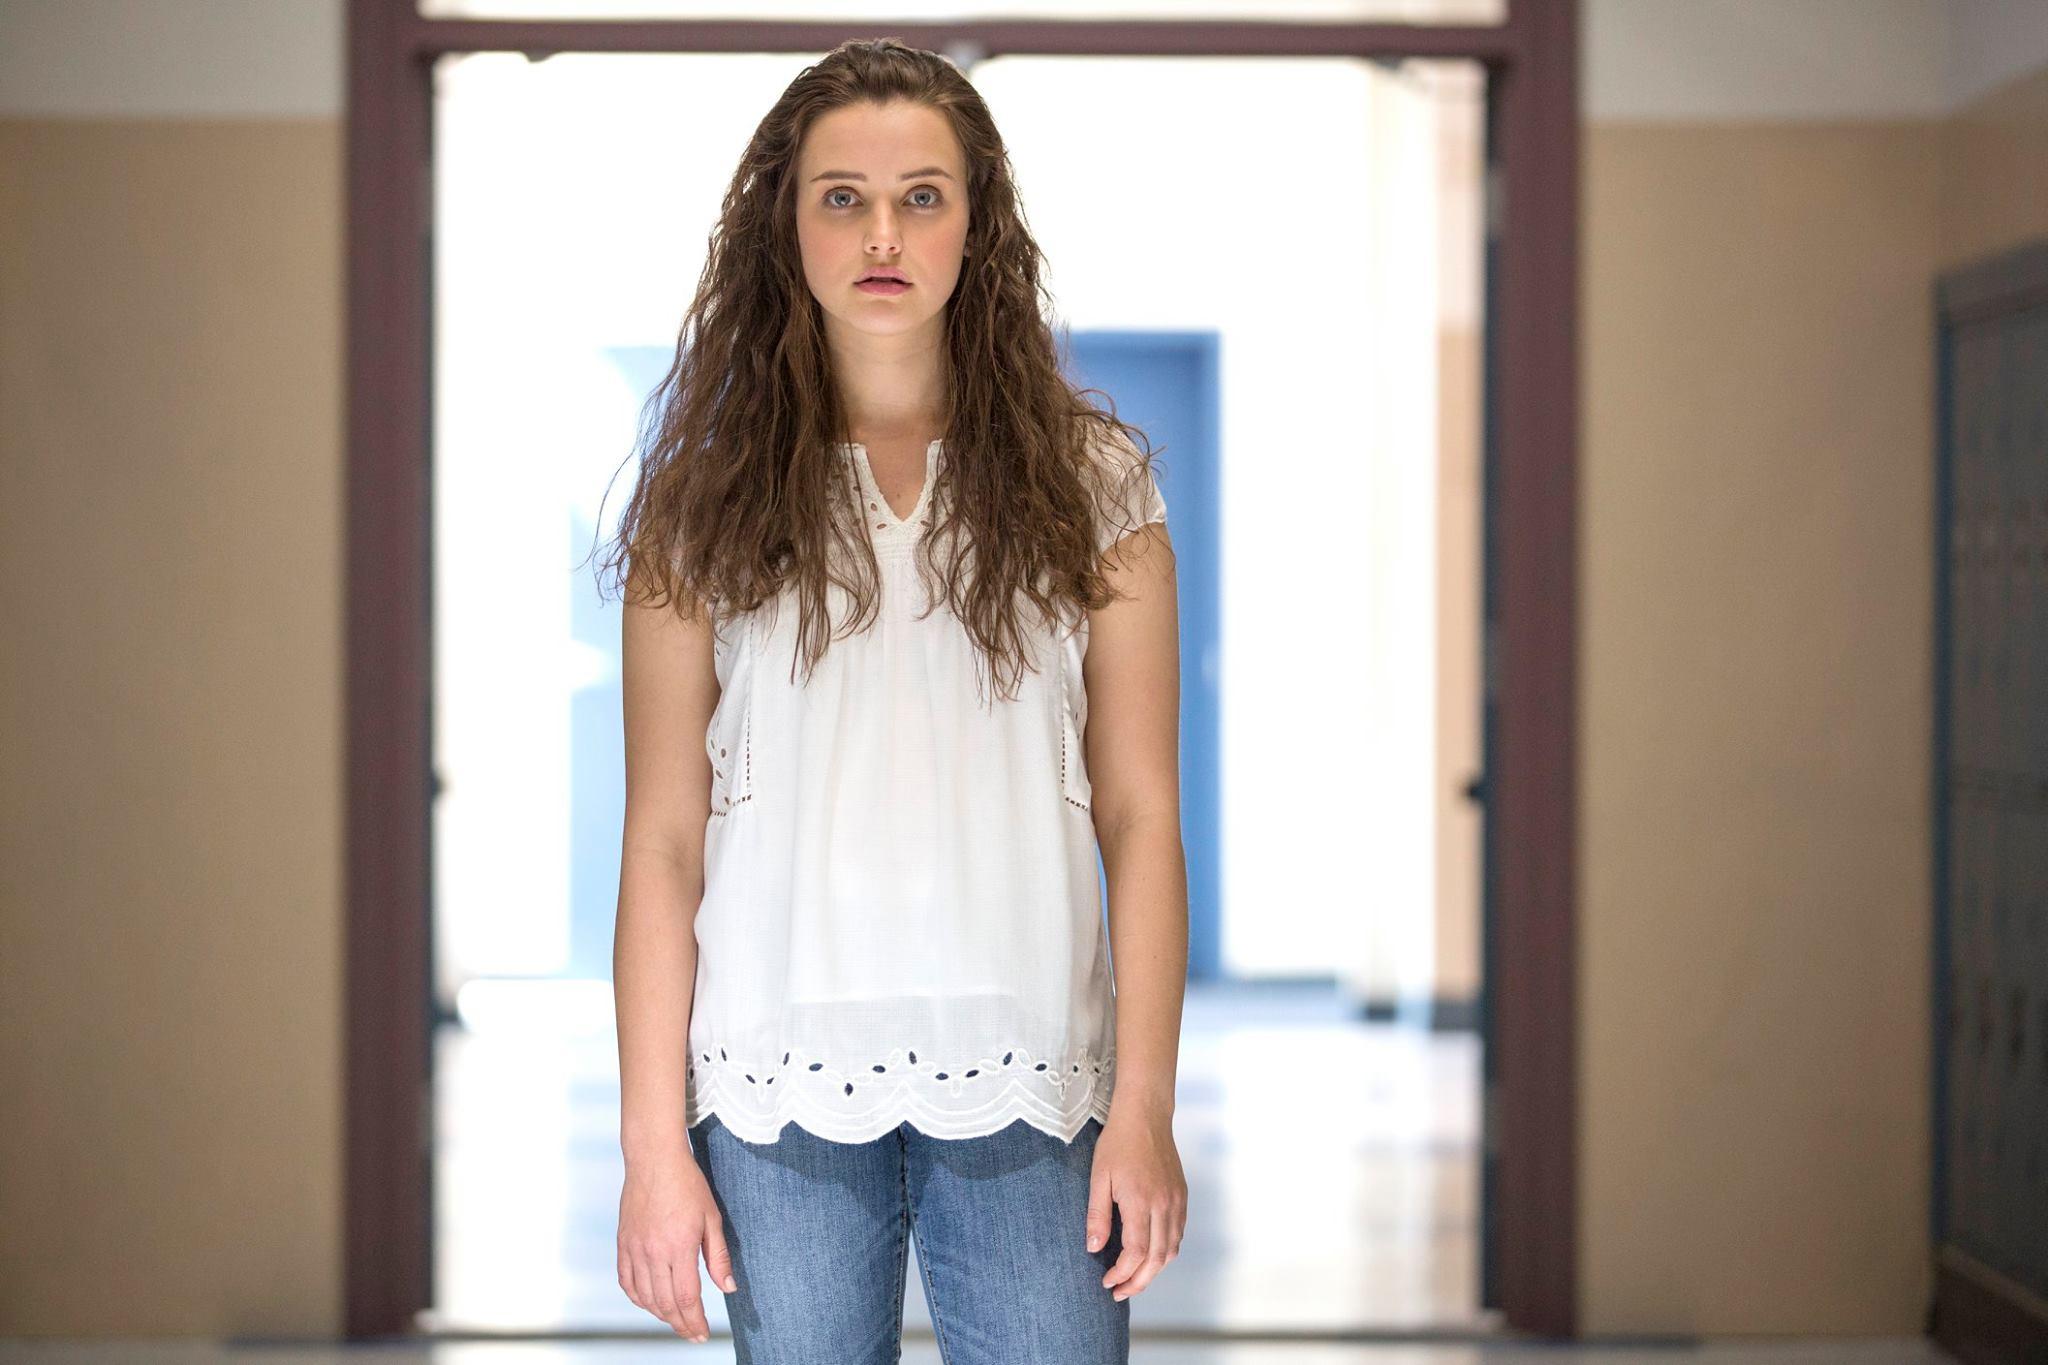 Creators of the series chose to show protagonist Hannah Baker’s suicide on screen. “It overwhelmingly seems to me that the most irresponsible thing we could’ve done would have been not to show the death at all,” writer Nic Sheff said in an op-ed.